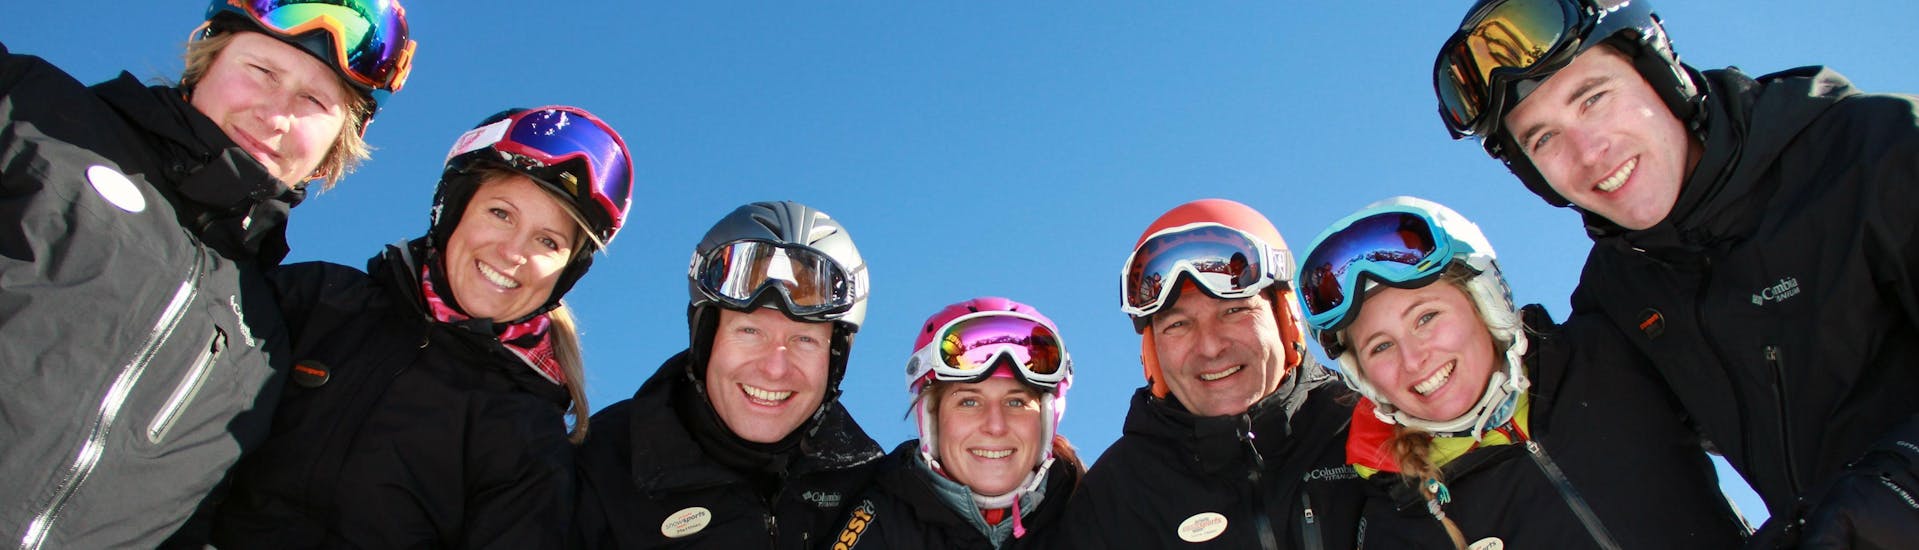 Private Ski Lessons for Adults of All Levels with Private Snowsports Team Gstaad - Hero image